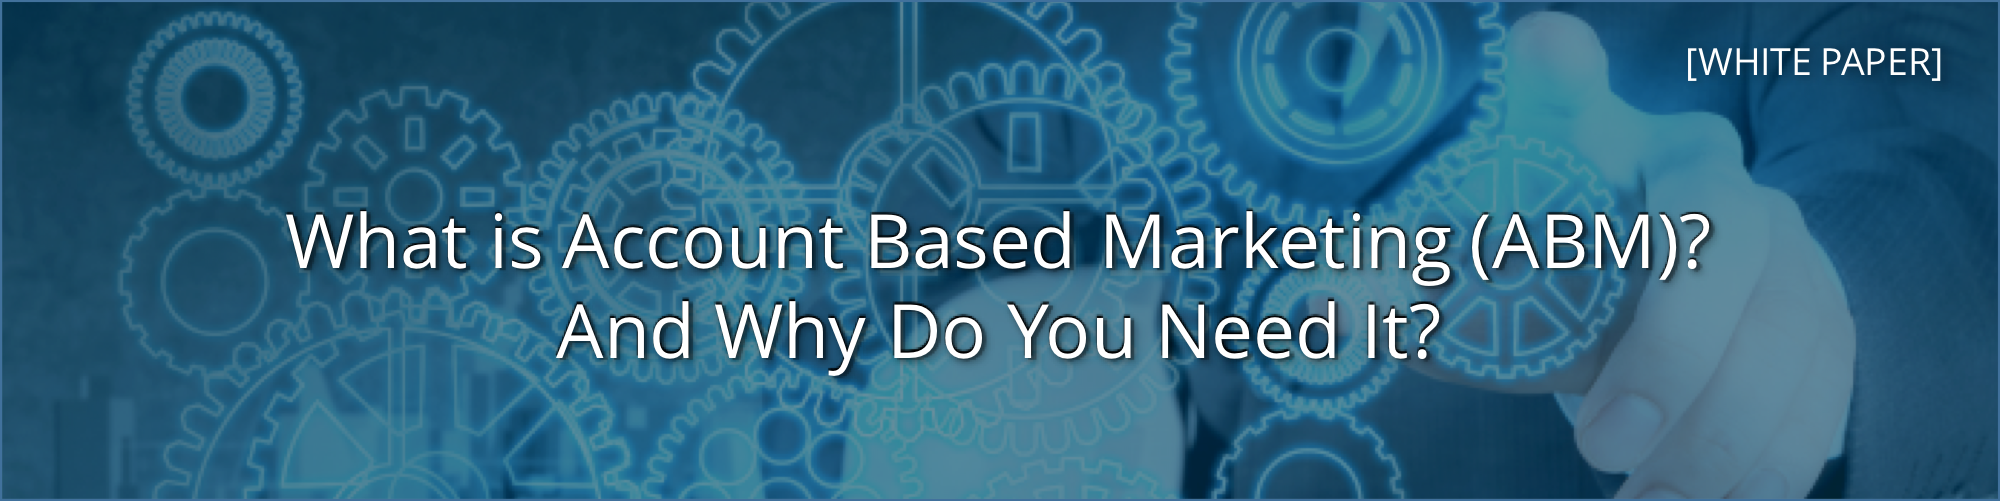 What is Account Based Marketing (ABM)? And Why Do You Need It? Banner